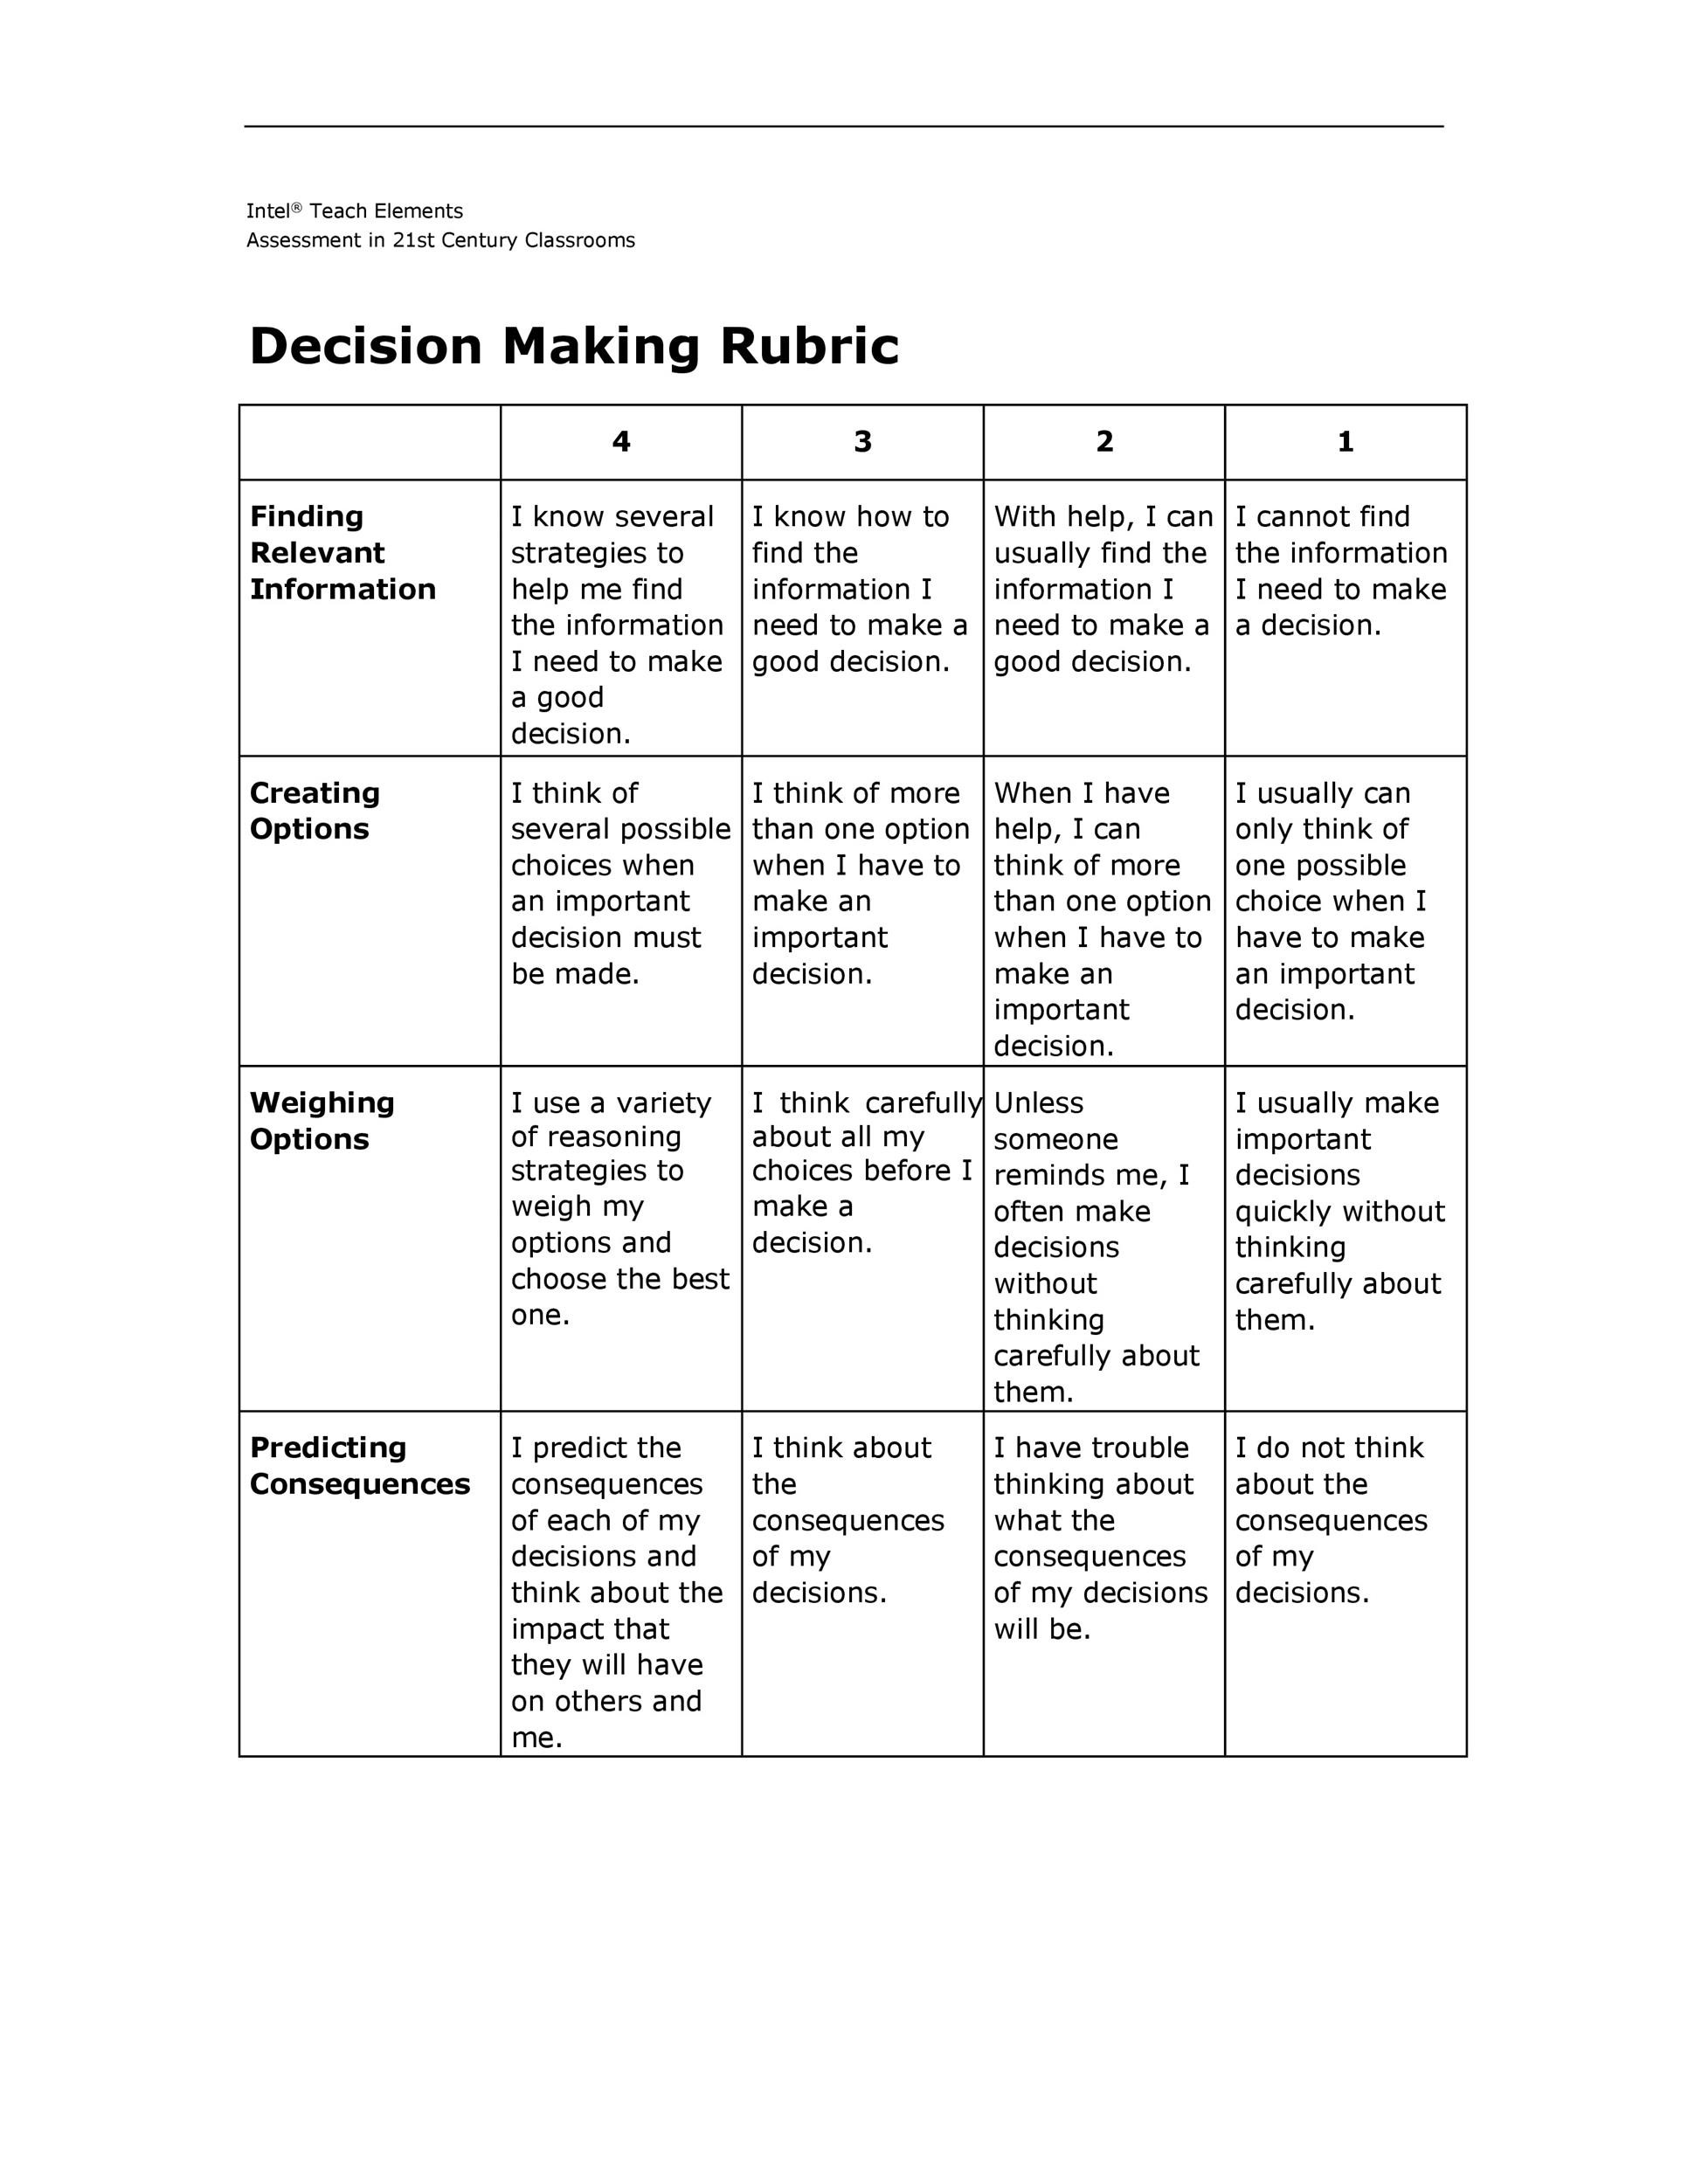 grading-rubric-template-word-sample-professional-template